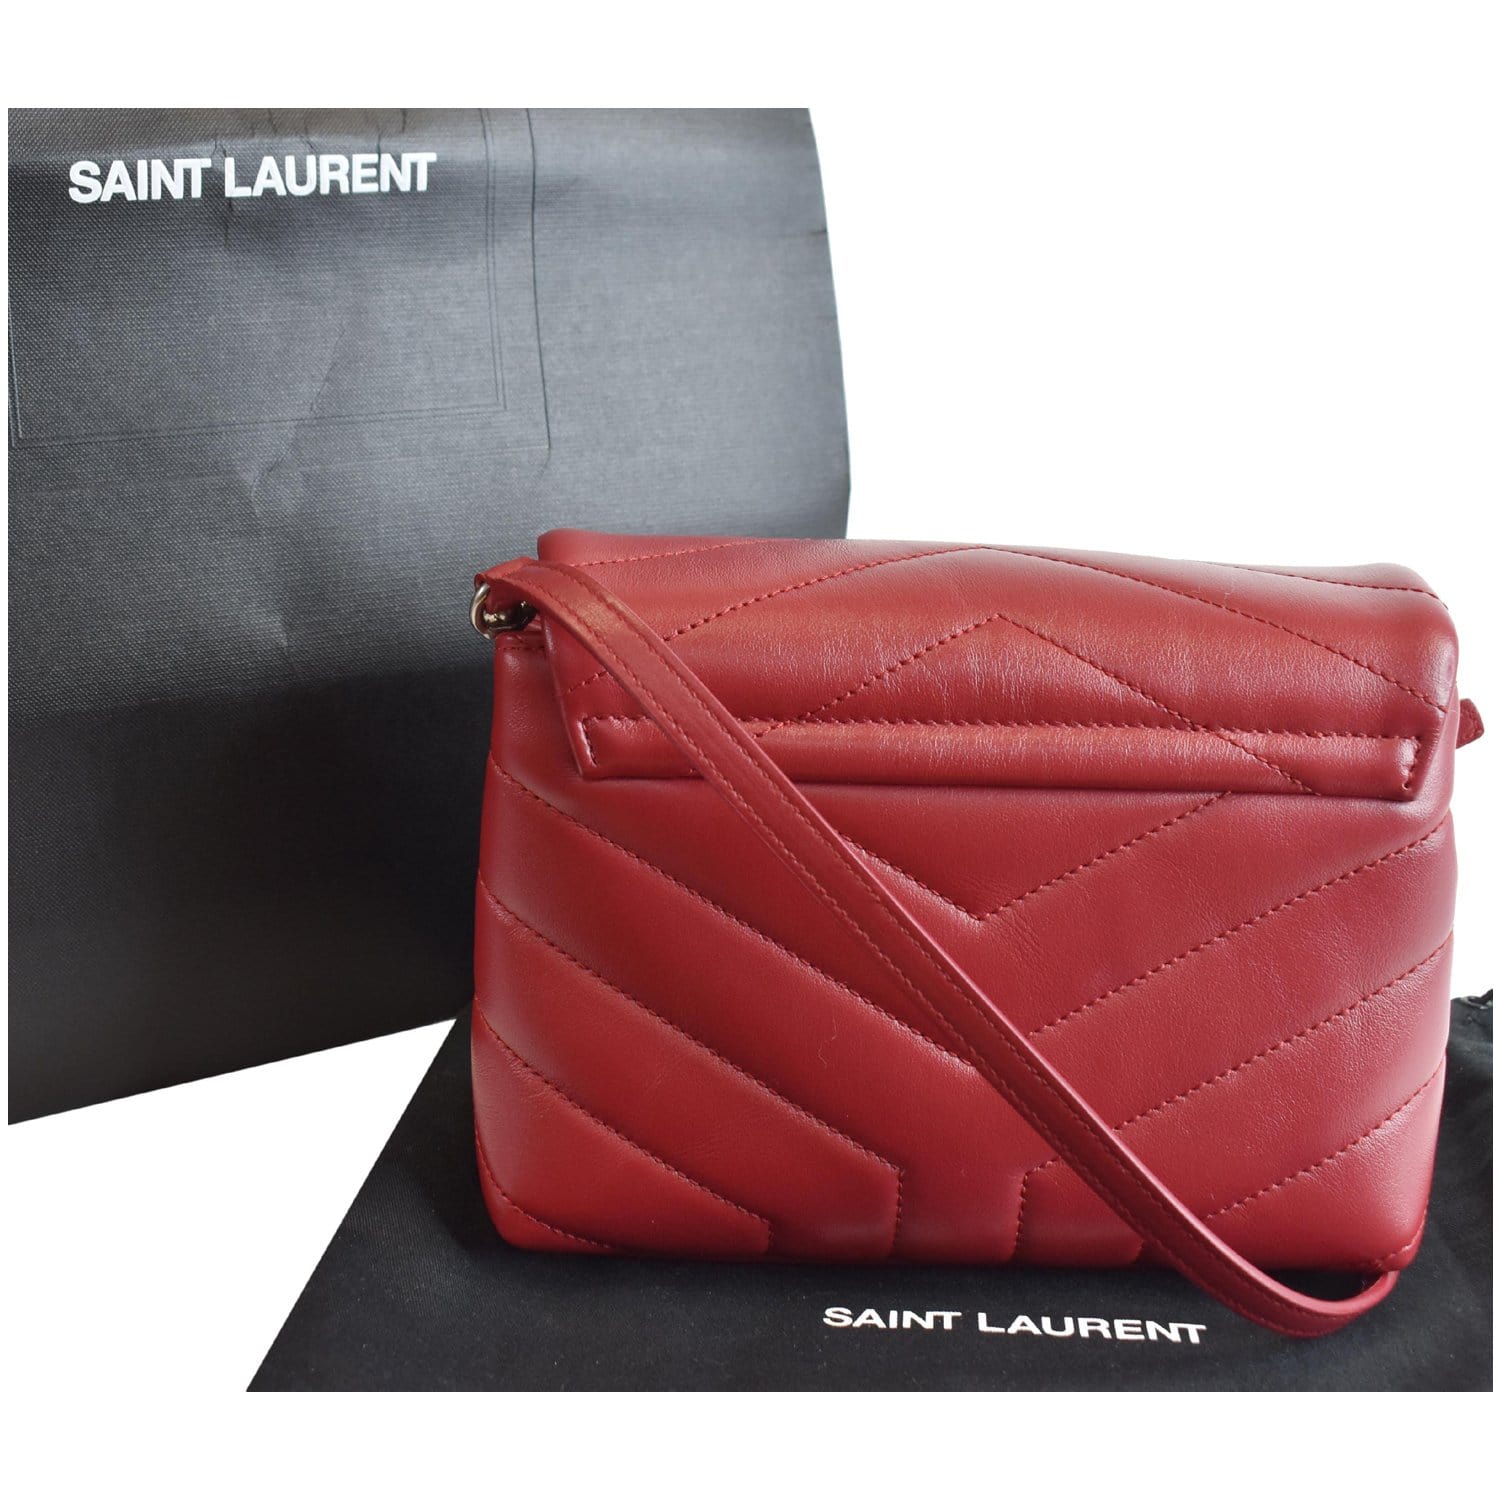 YSL LOULOU Toy Bag “Y” Matelasse Leather (Varied Colors)